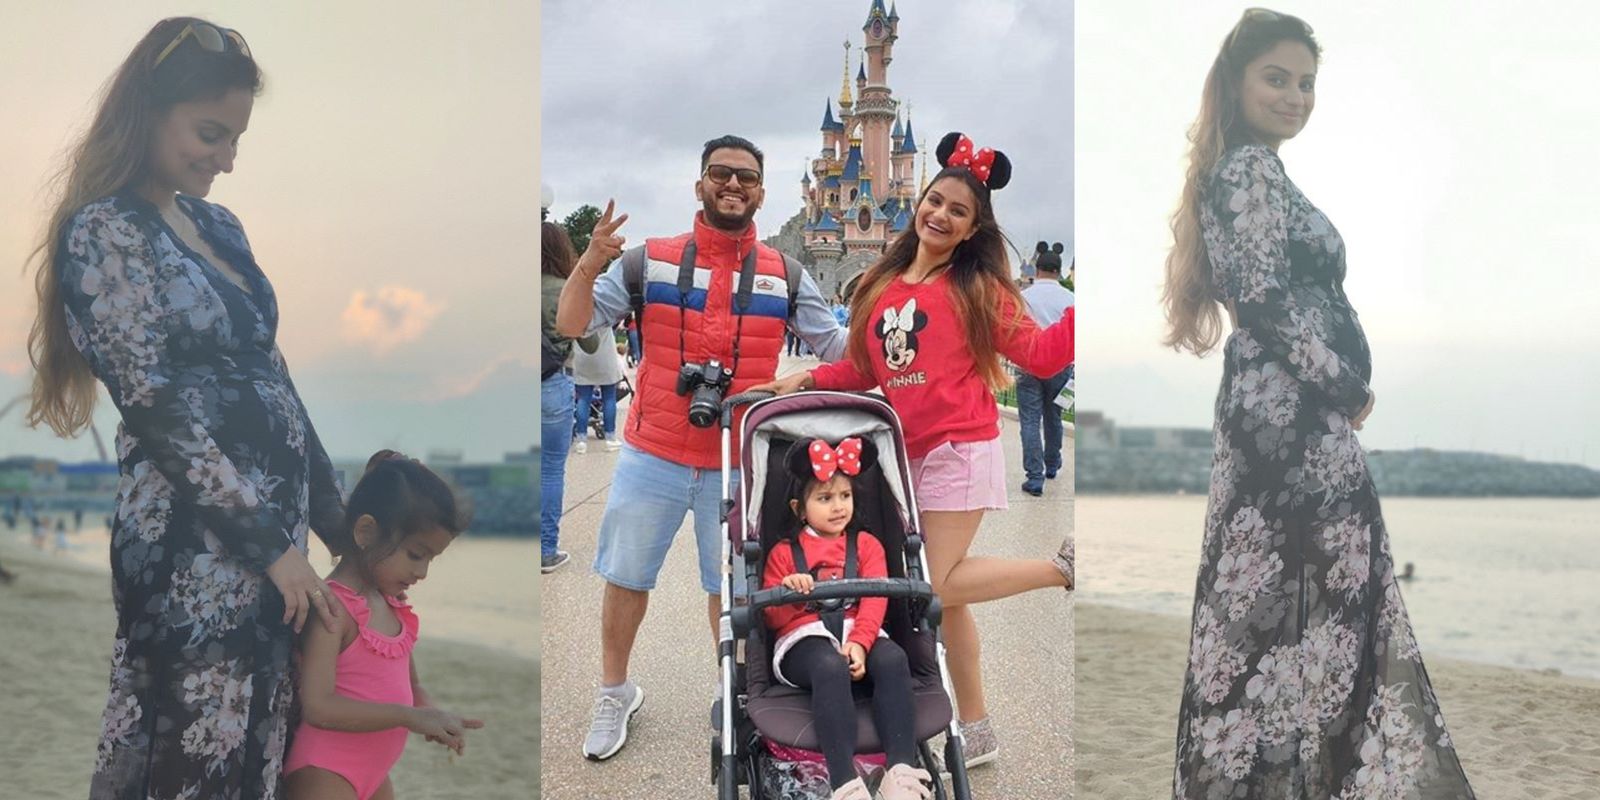 Bigg Boss 8 Contestant Dimpy Ganguli Expecting Her Second Child, Shares News On Social Media!